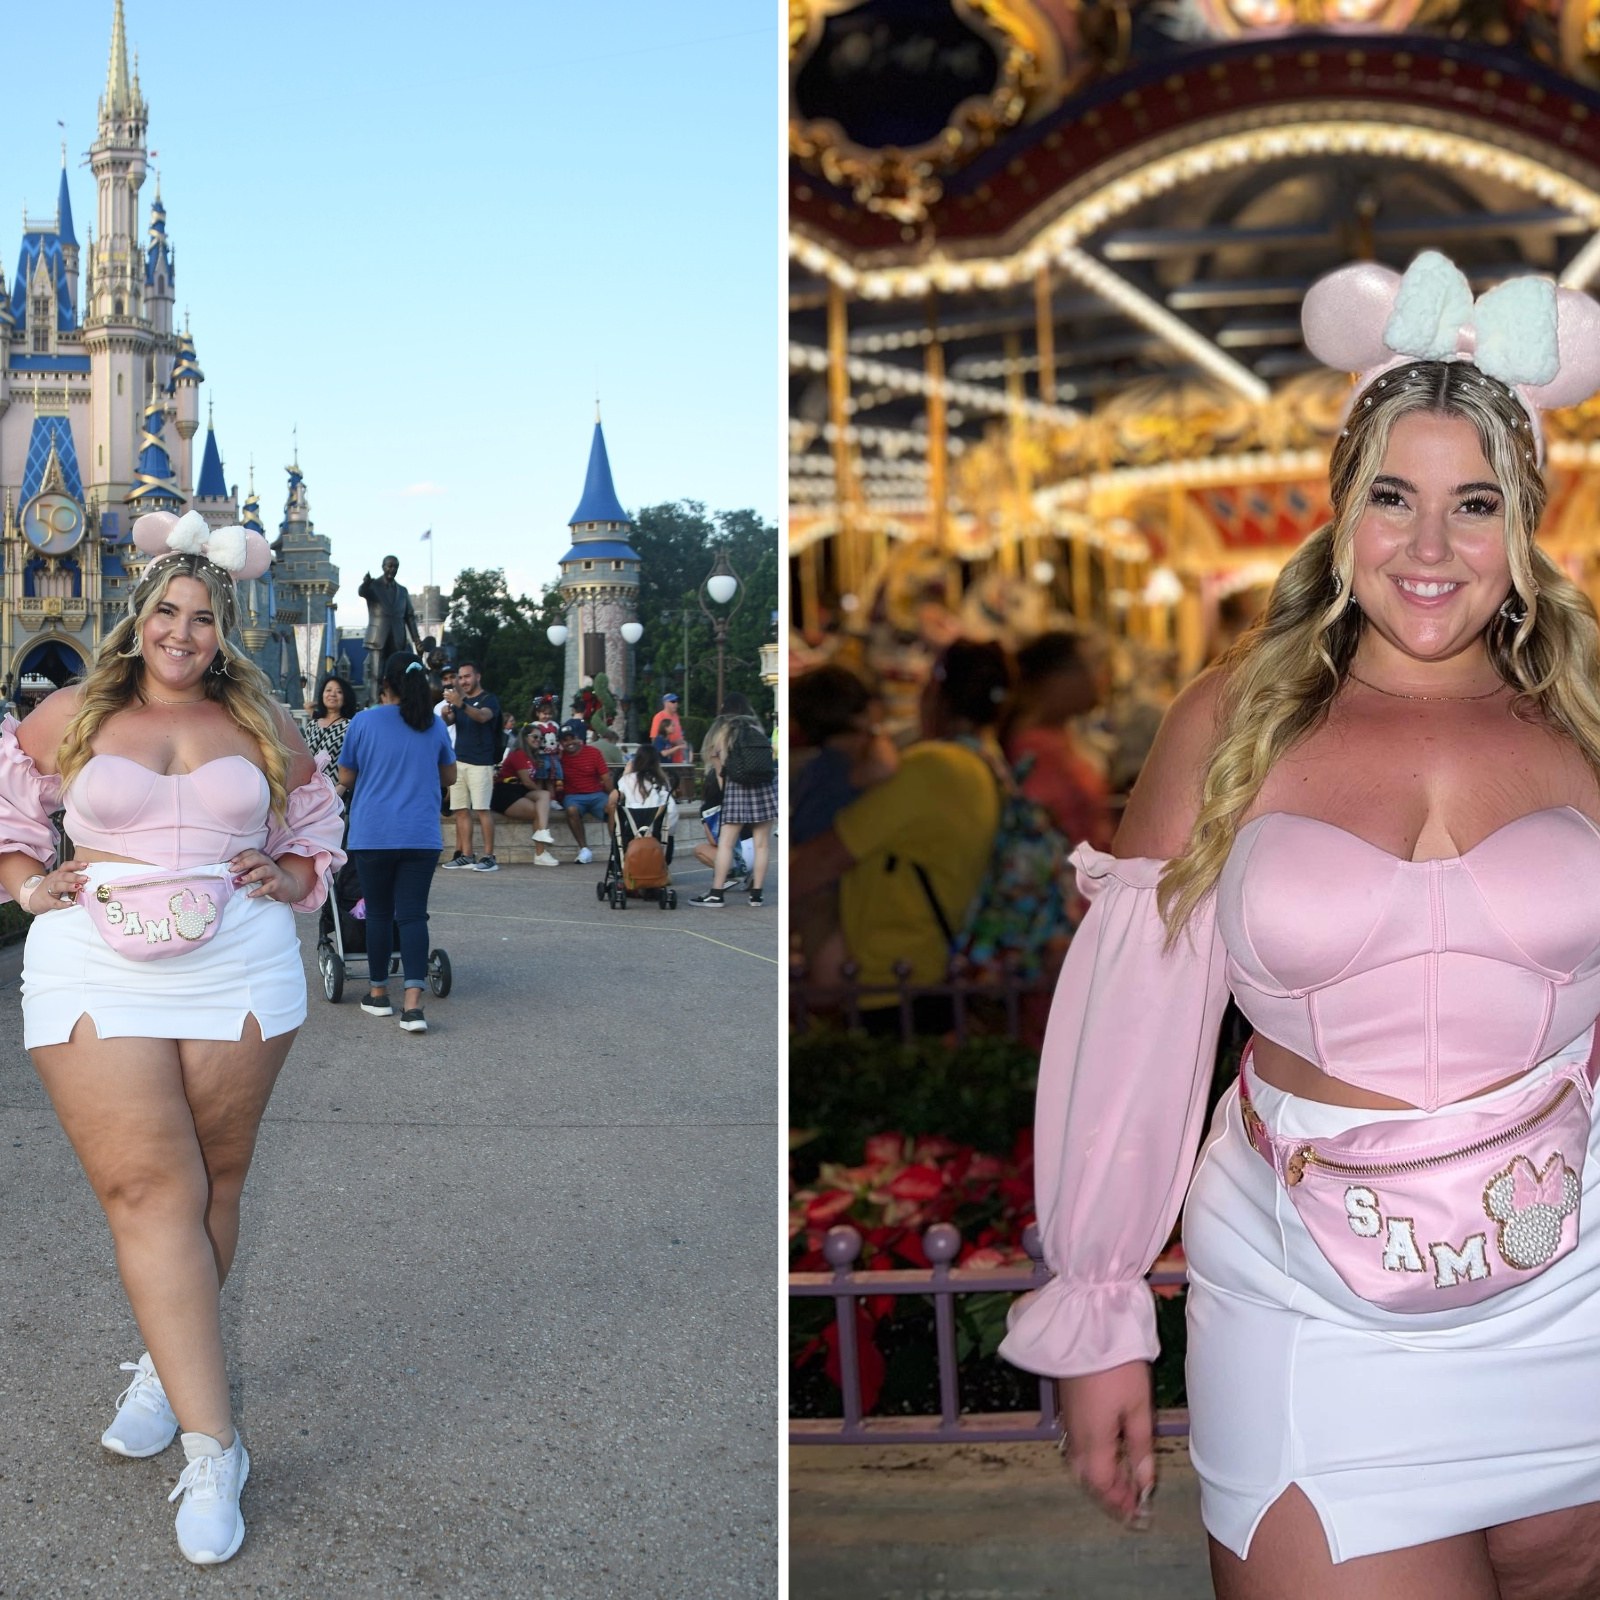 Disney Influencer Reacts to Being Body Shamed Over 'Inappropriate' Outfit